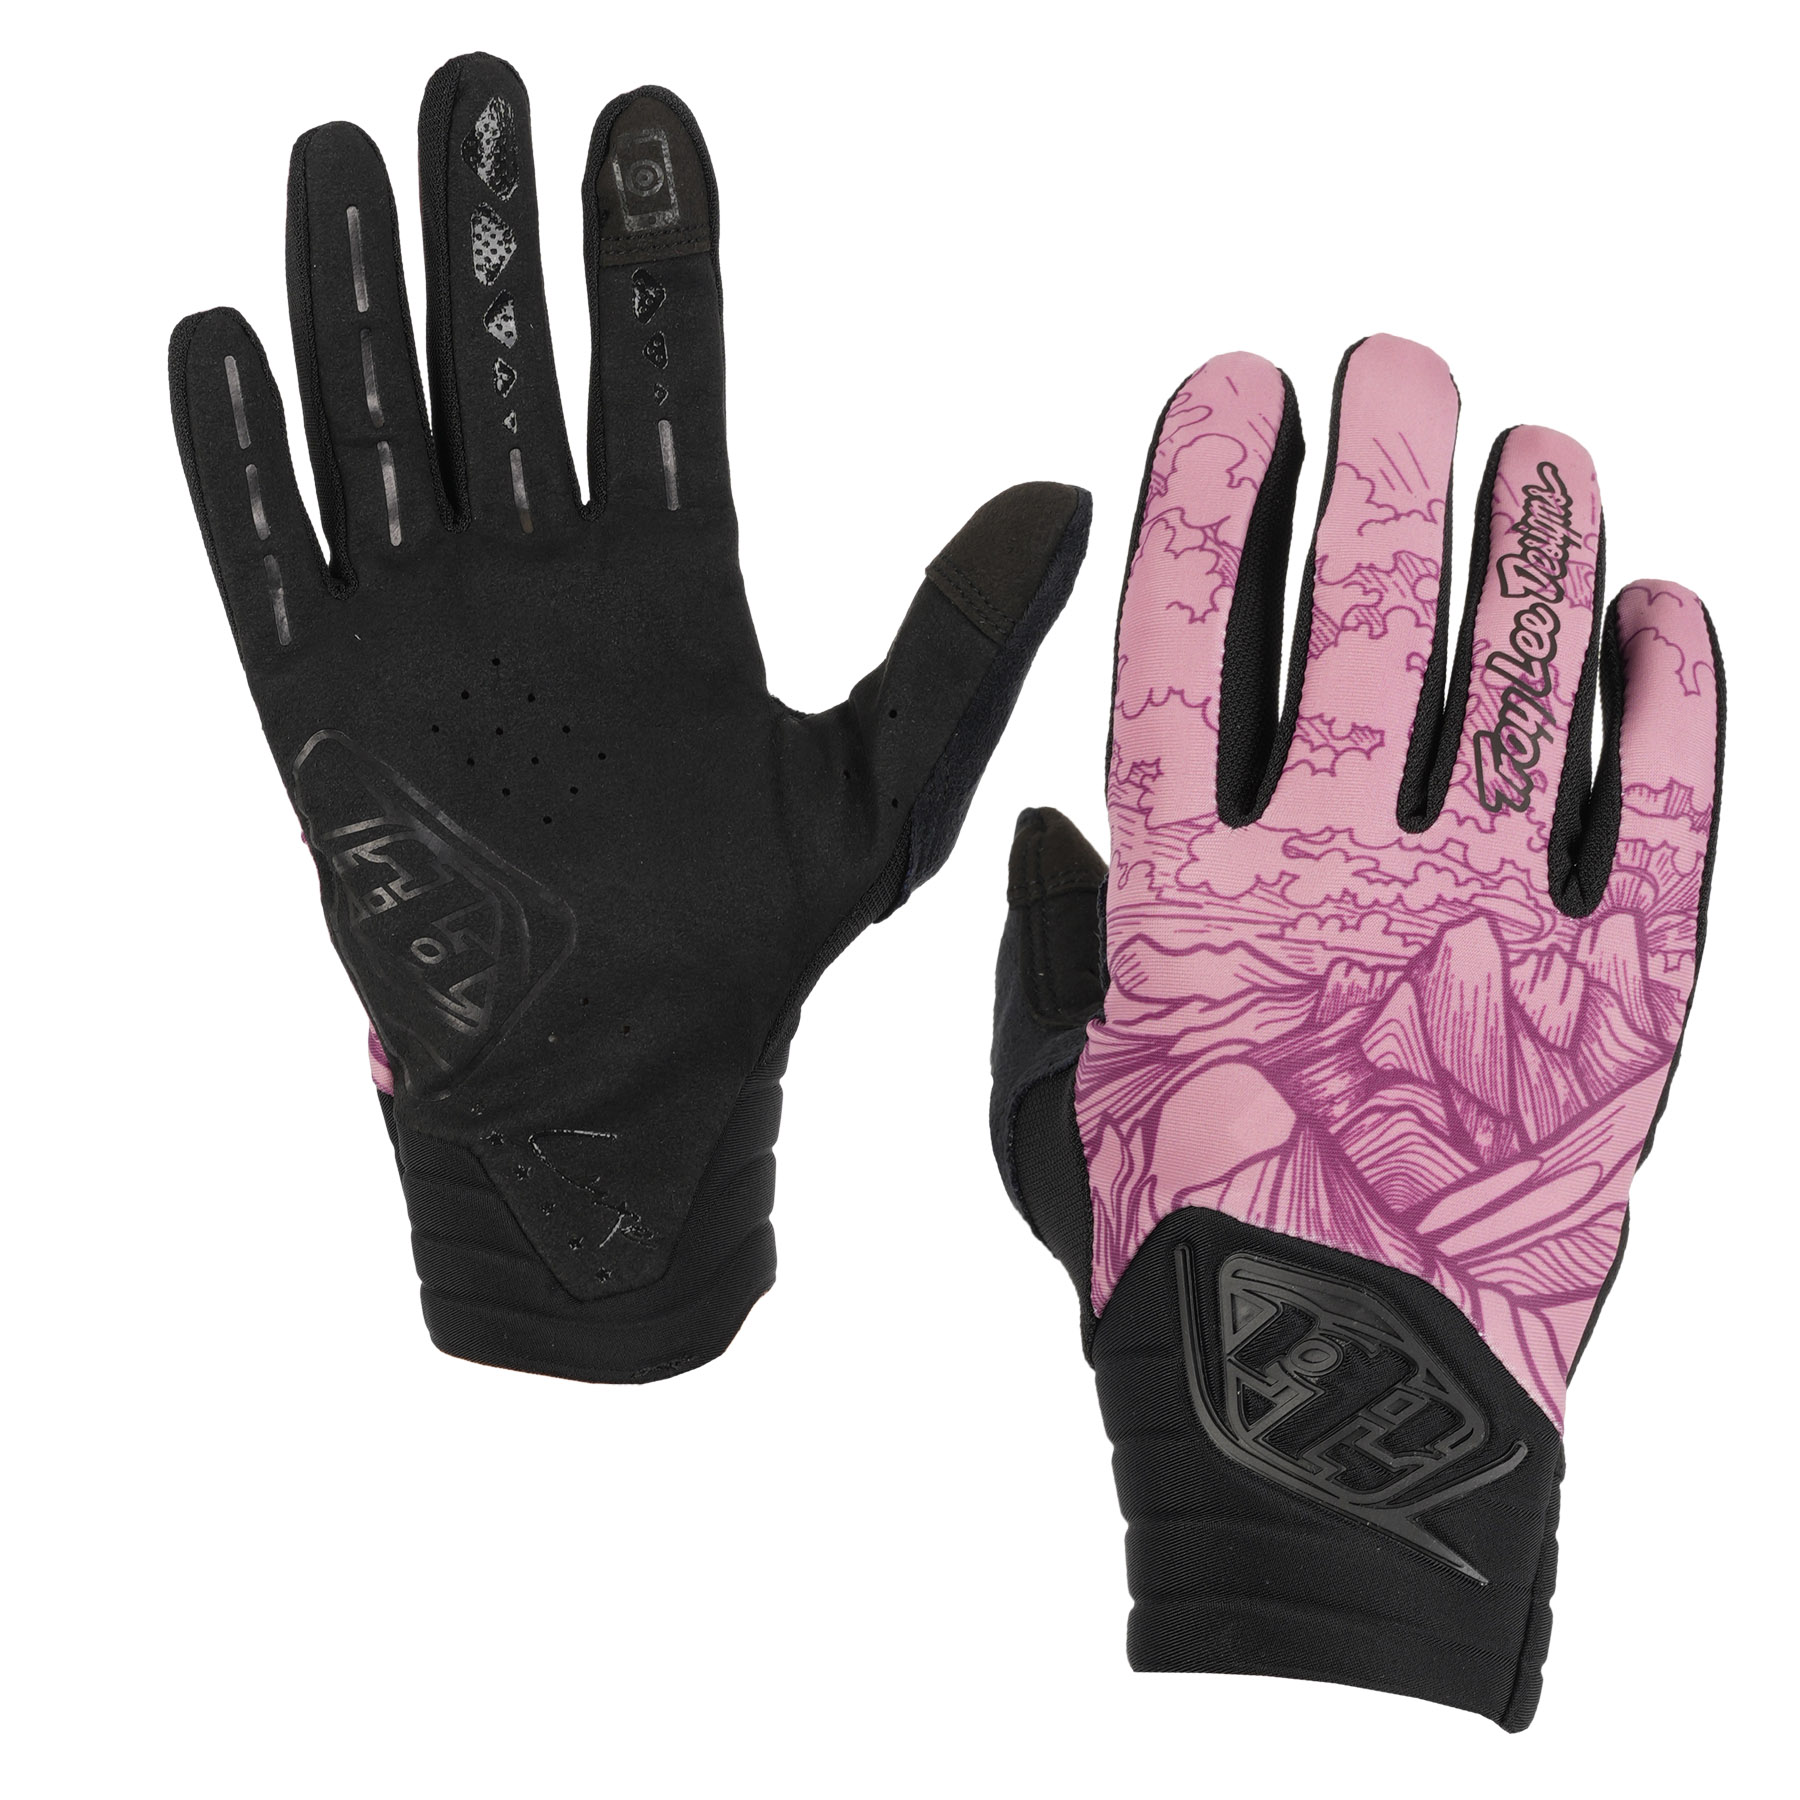 Image of Troy Lee Designs Luxe Gloves Women - Micayla Gatto Rosewood